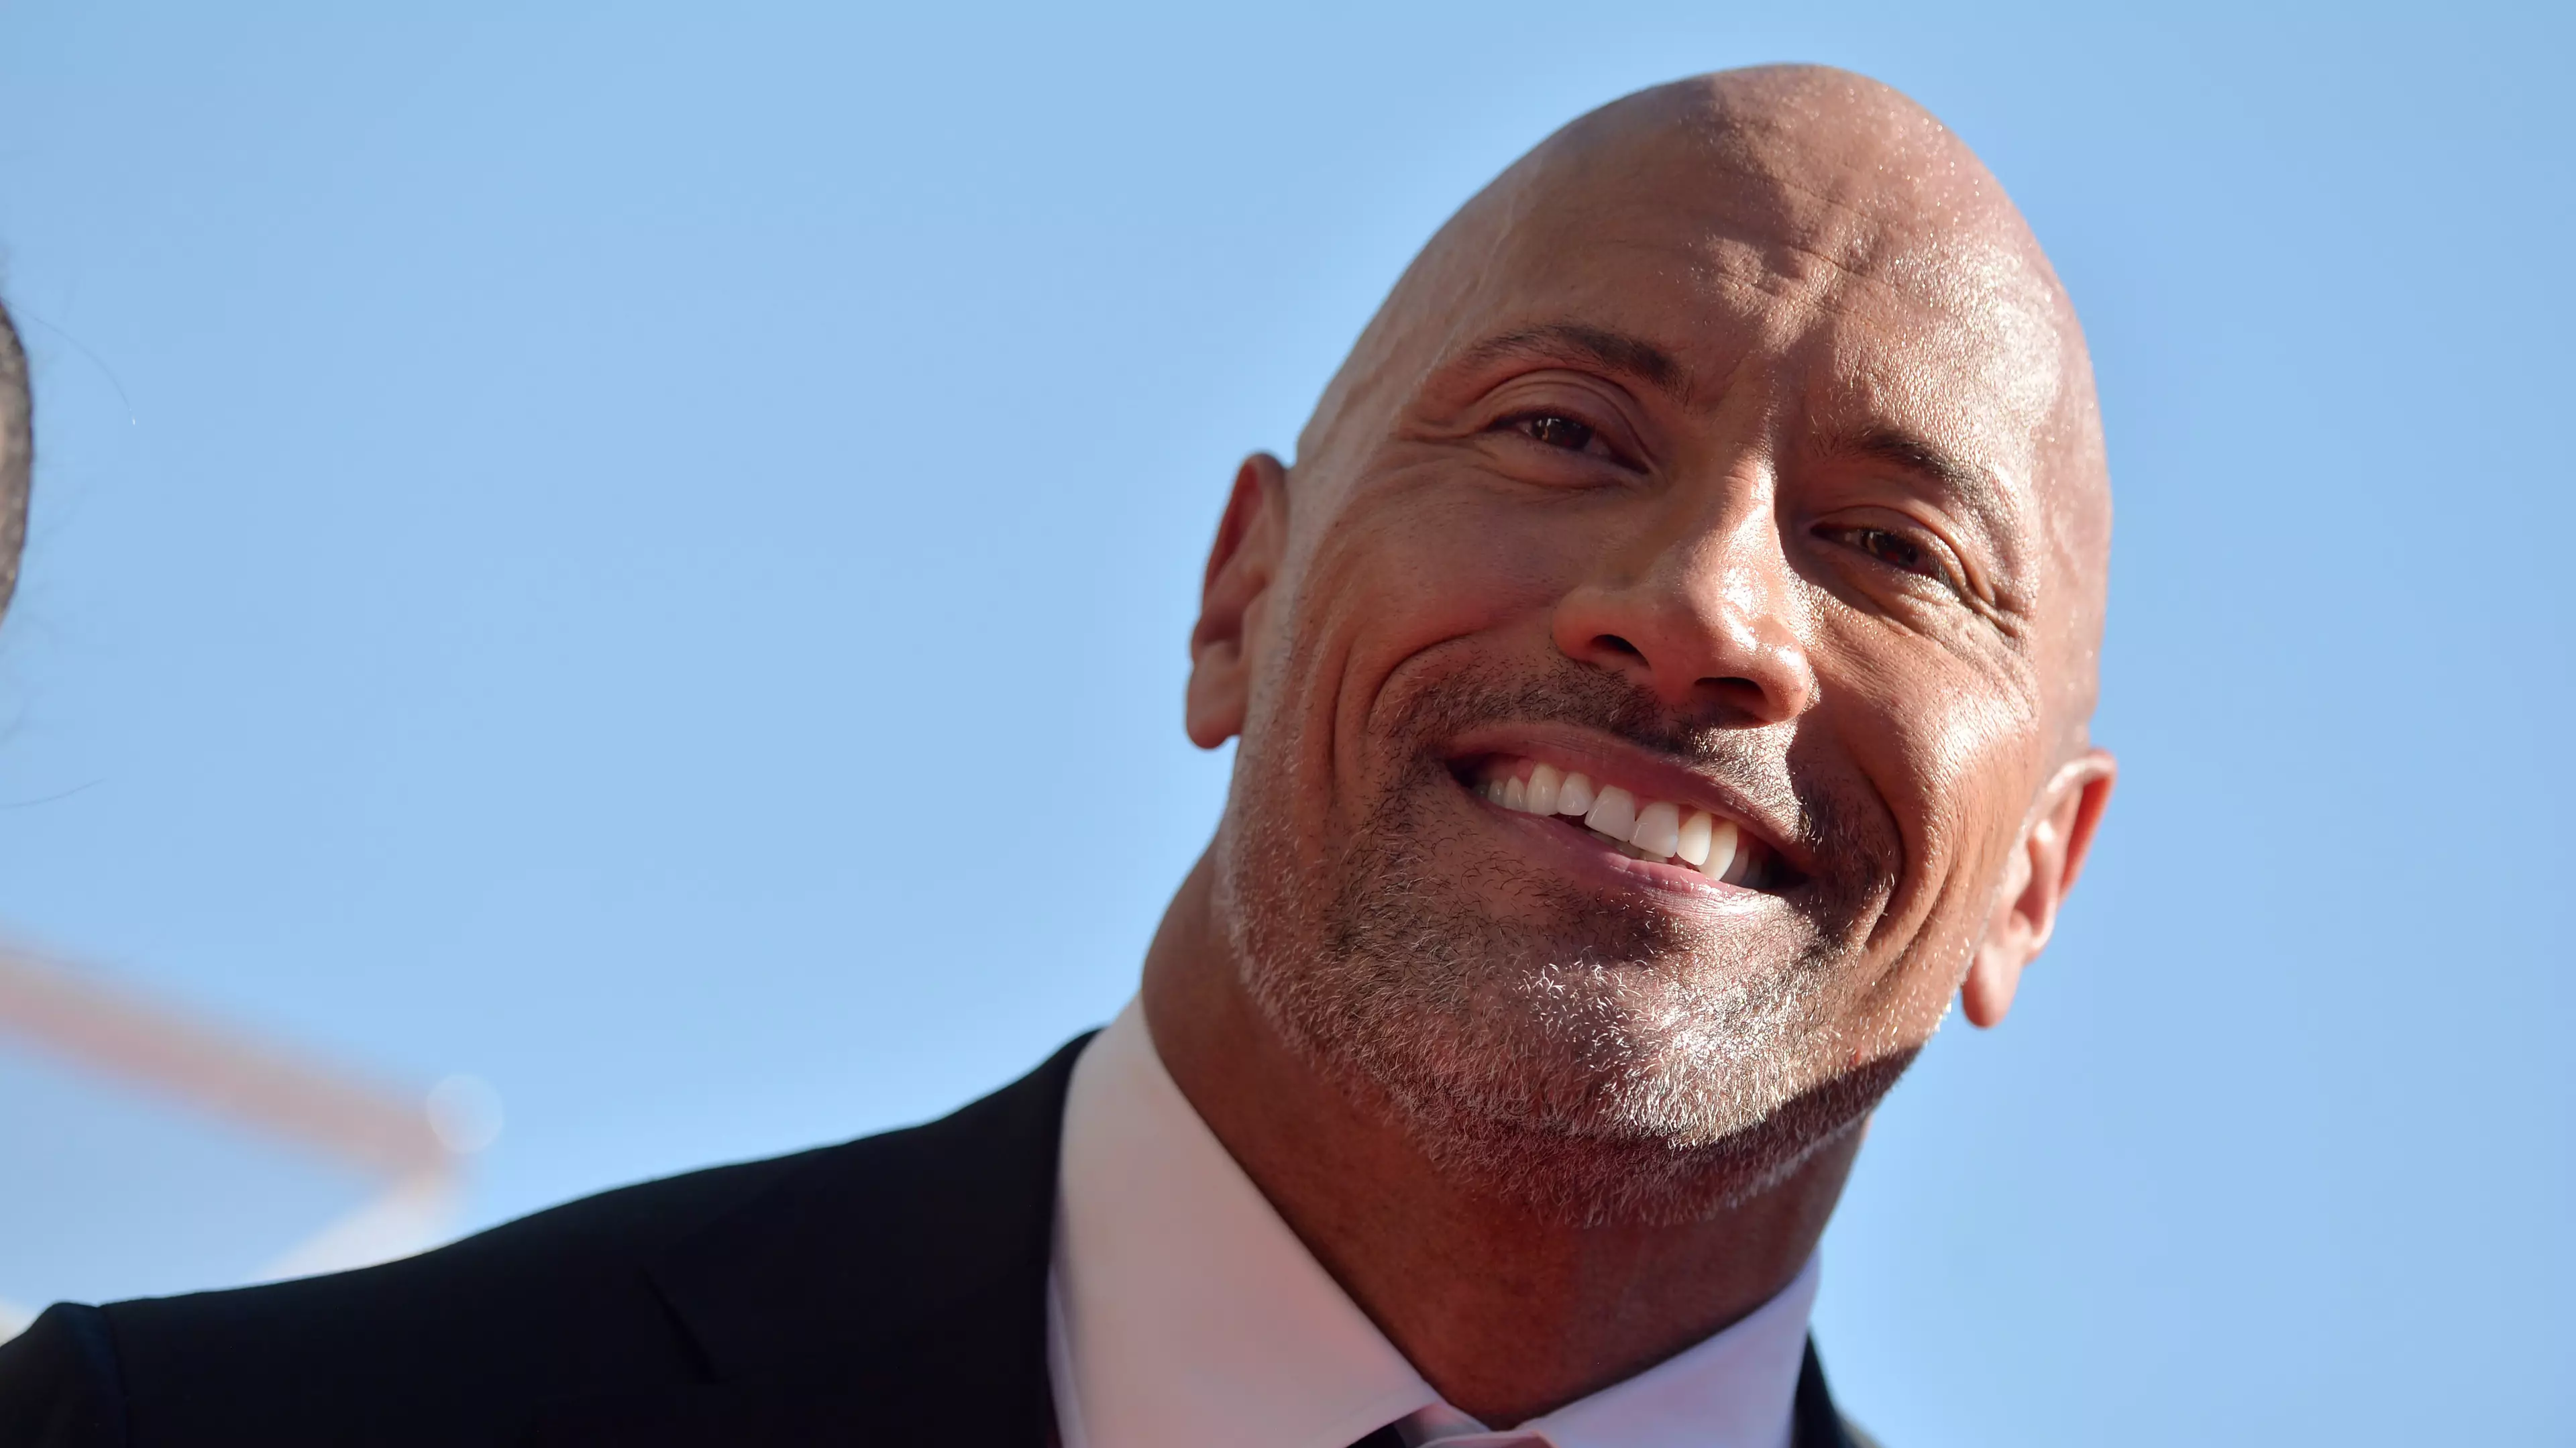 Dwayne 'The Rock' Johnson Opens Up About Battle With Depression